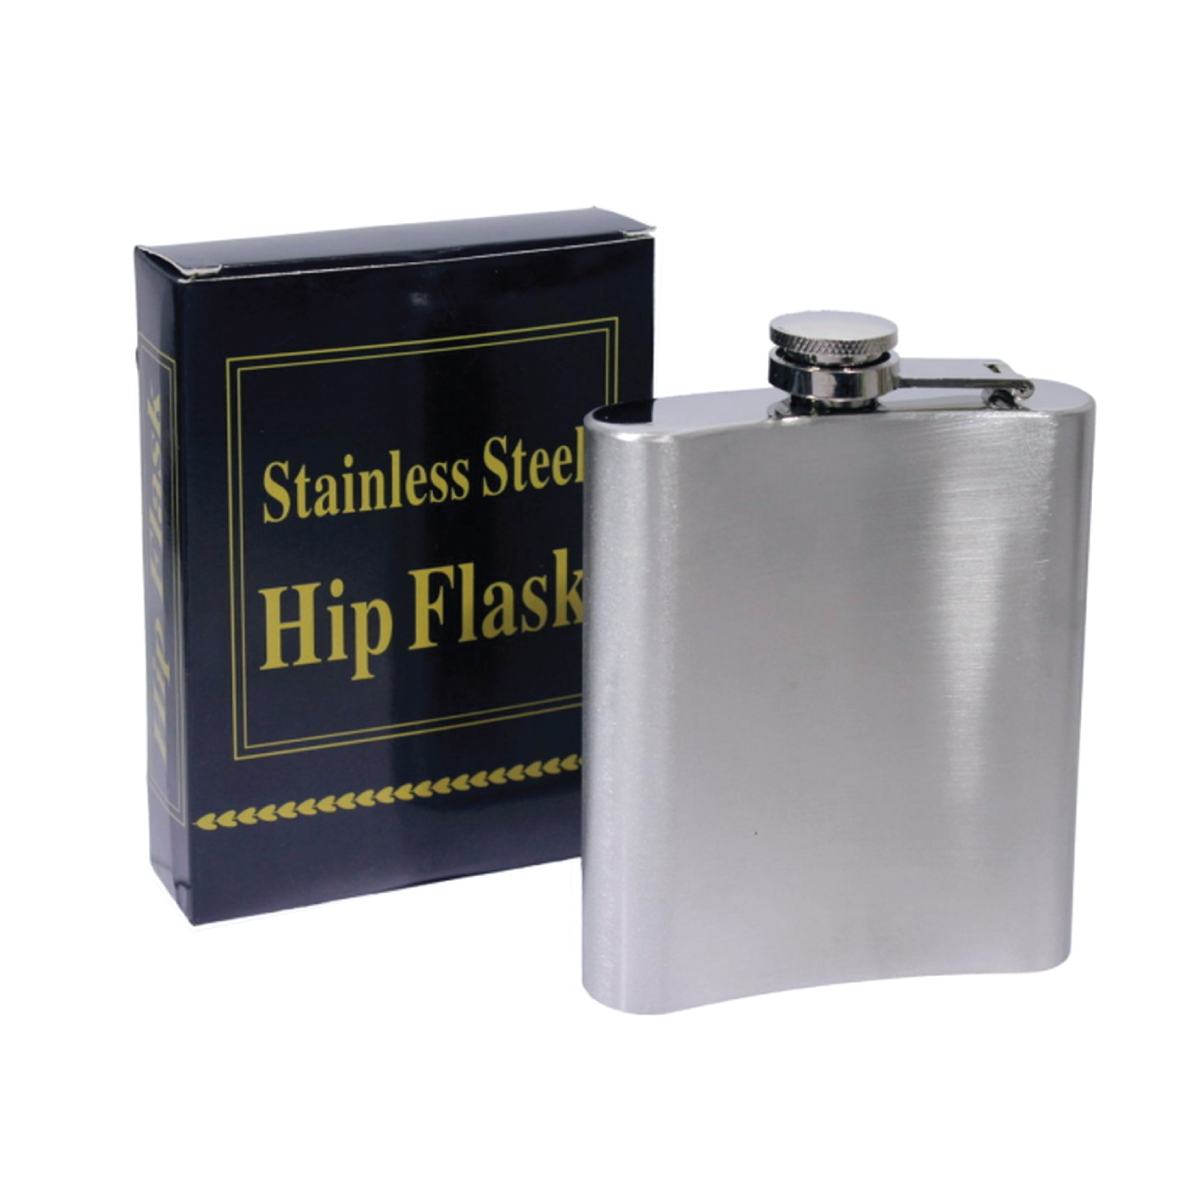 Silver Stainless Steel Hip Flask 7oz - For Return Gift, Corporate Gifting, Office or Personal Use JA70Z